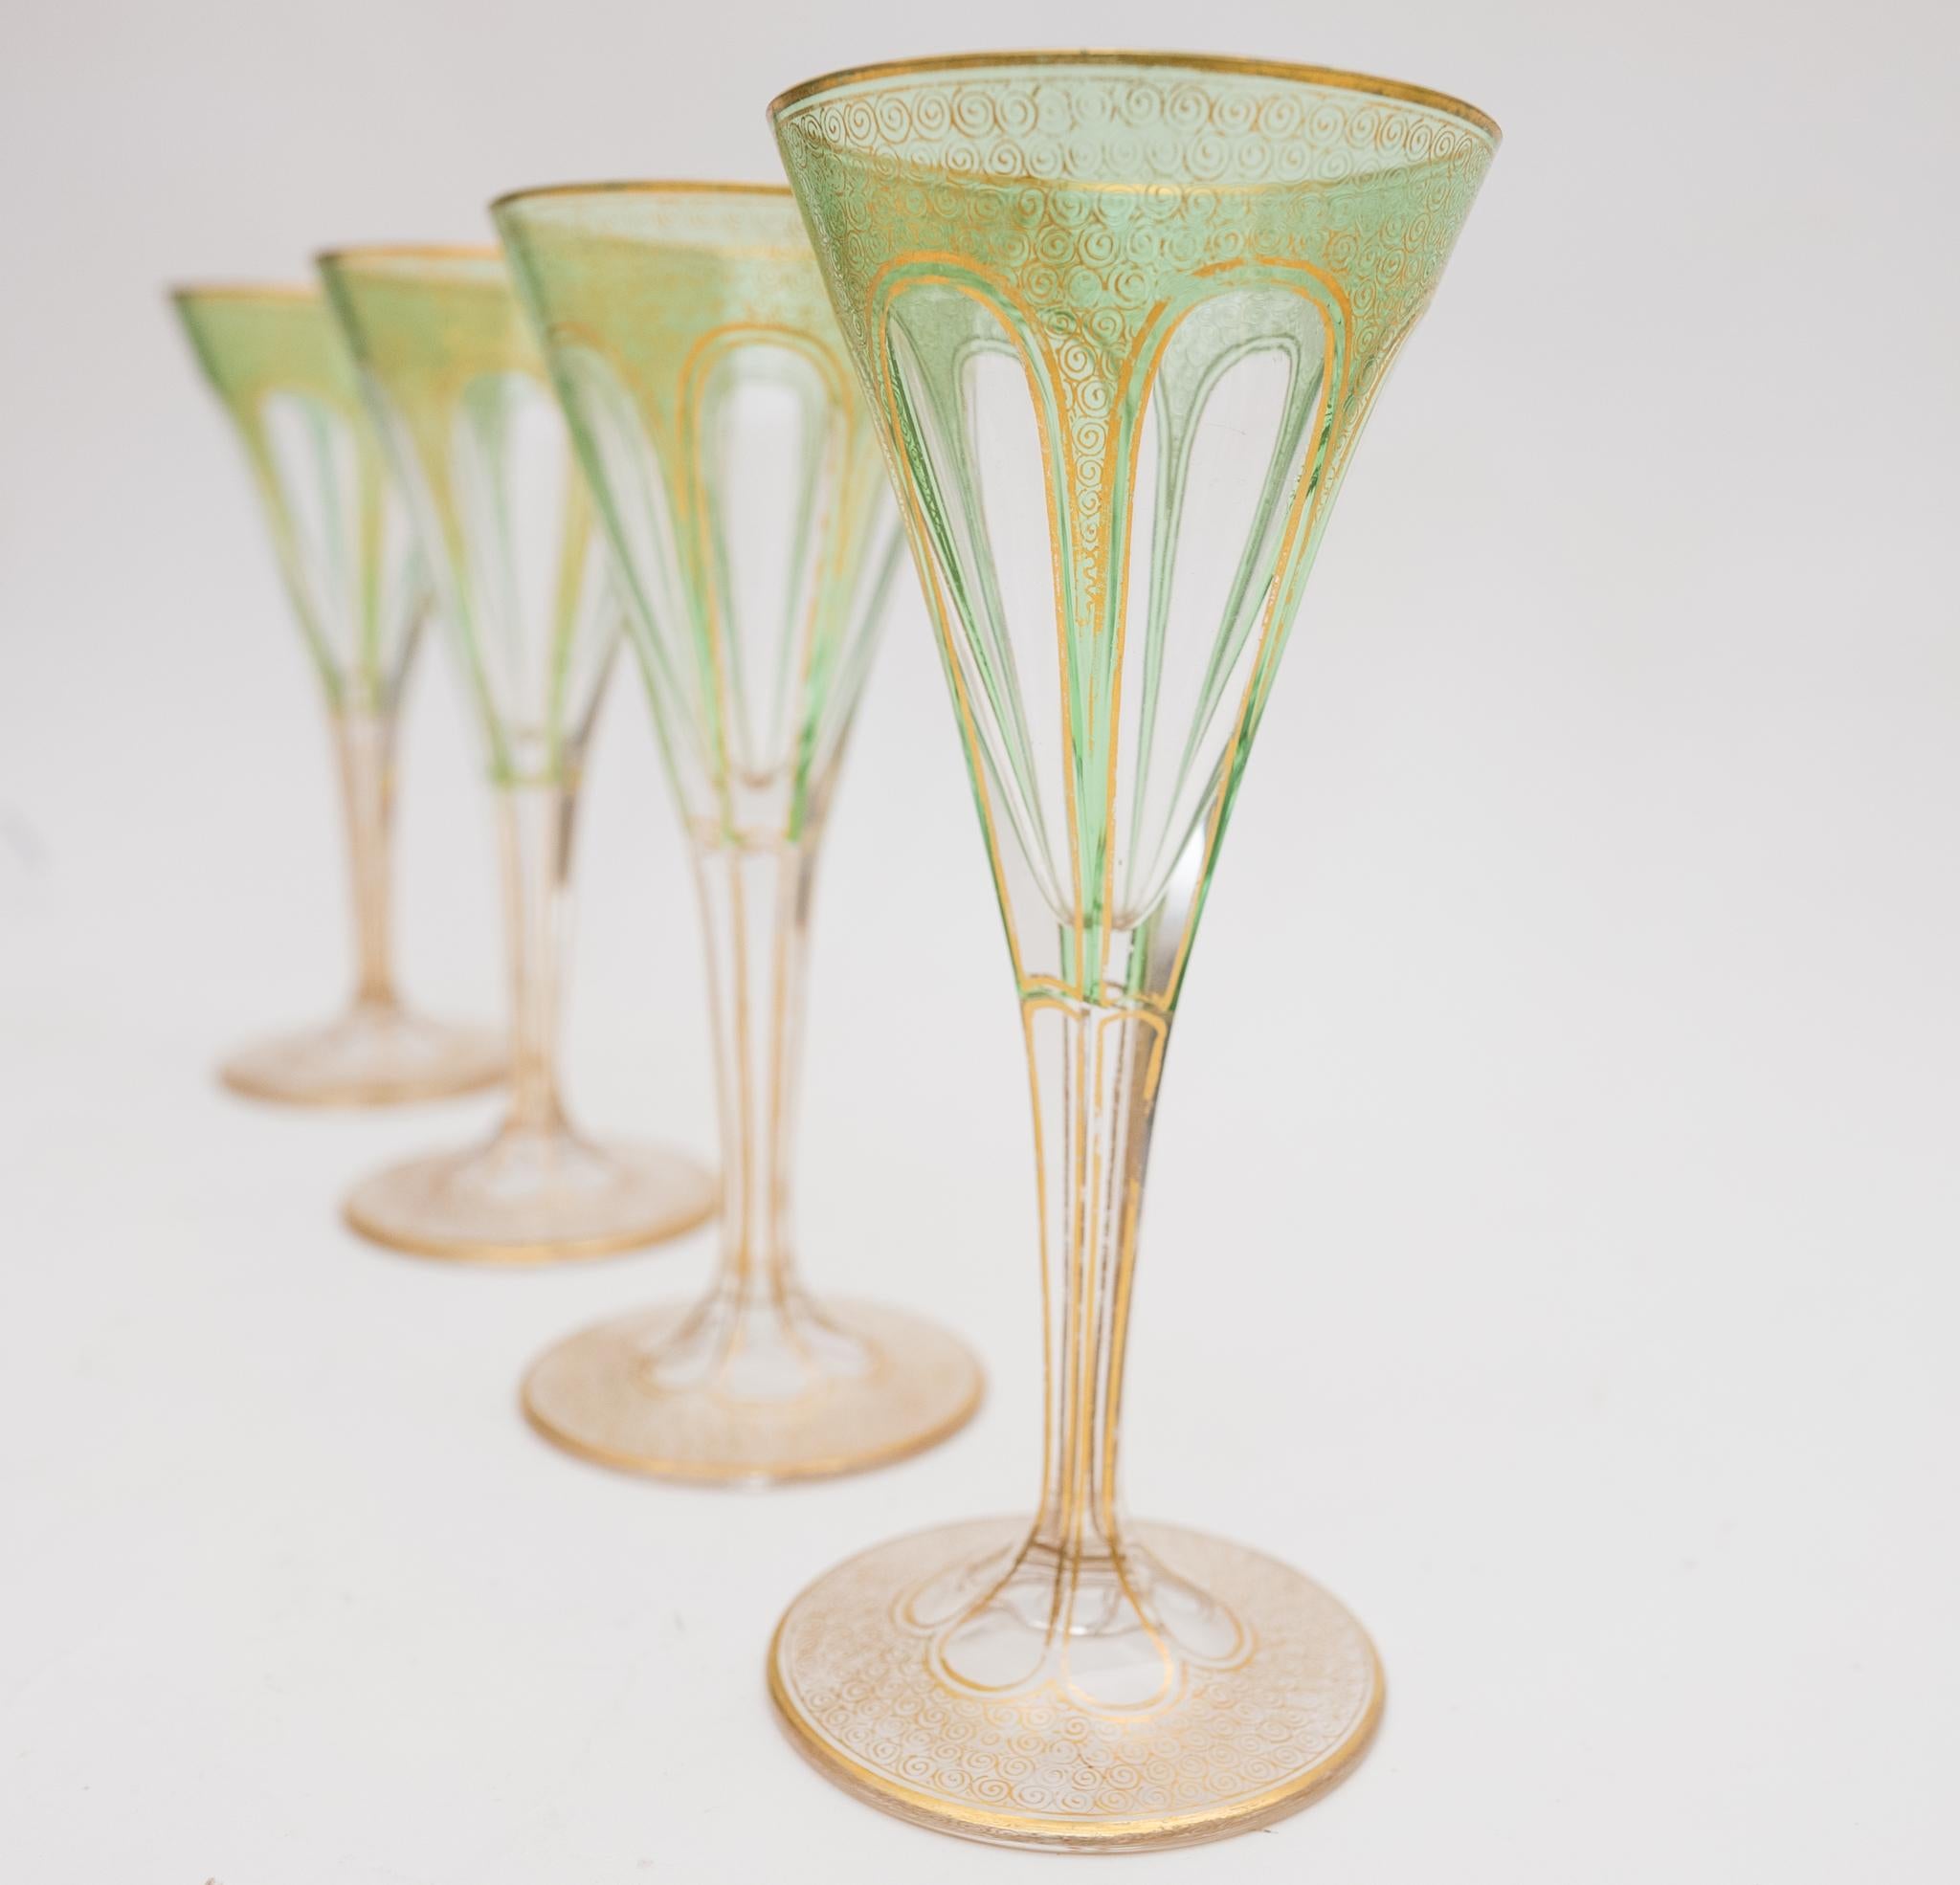 An elegant set of 4 antique last quarter 19th century glasses by the re known firm of Moser. This set has nice elongated cabochon style panels accented all over with 24 karat gilding. Fully cut and gilded stem and ready for entertaining ! In very